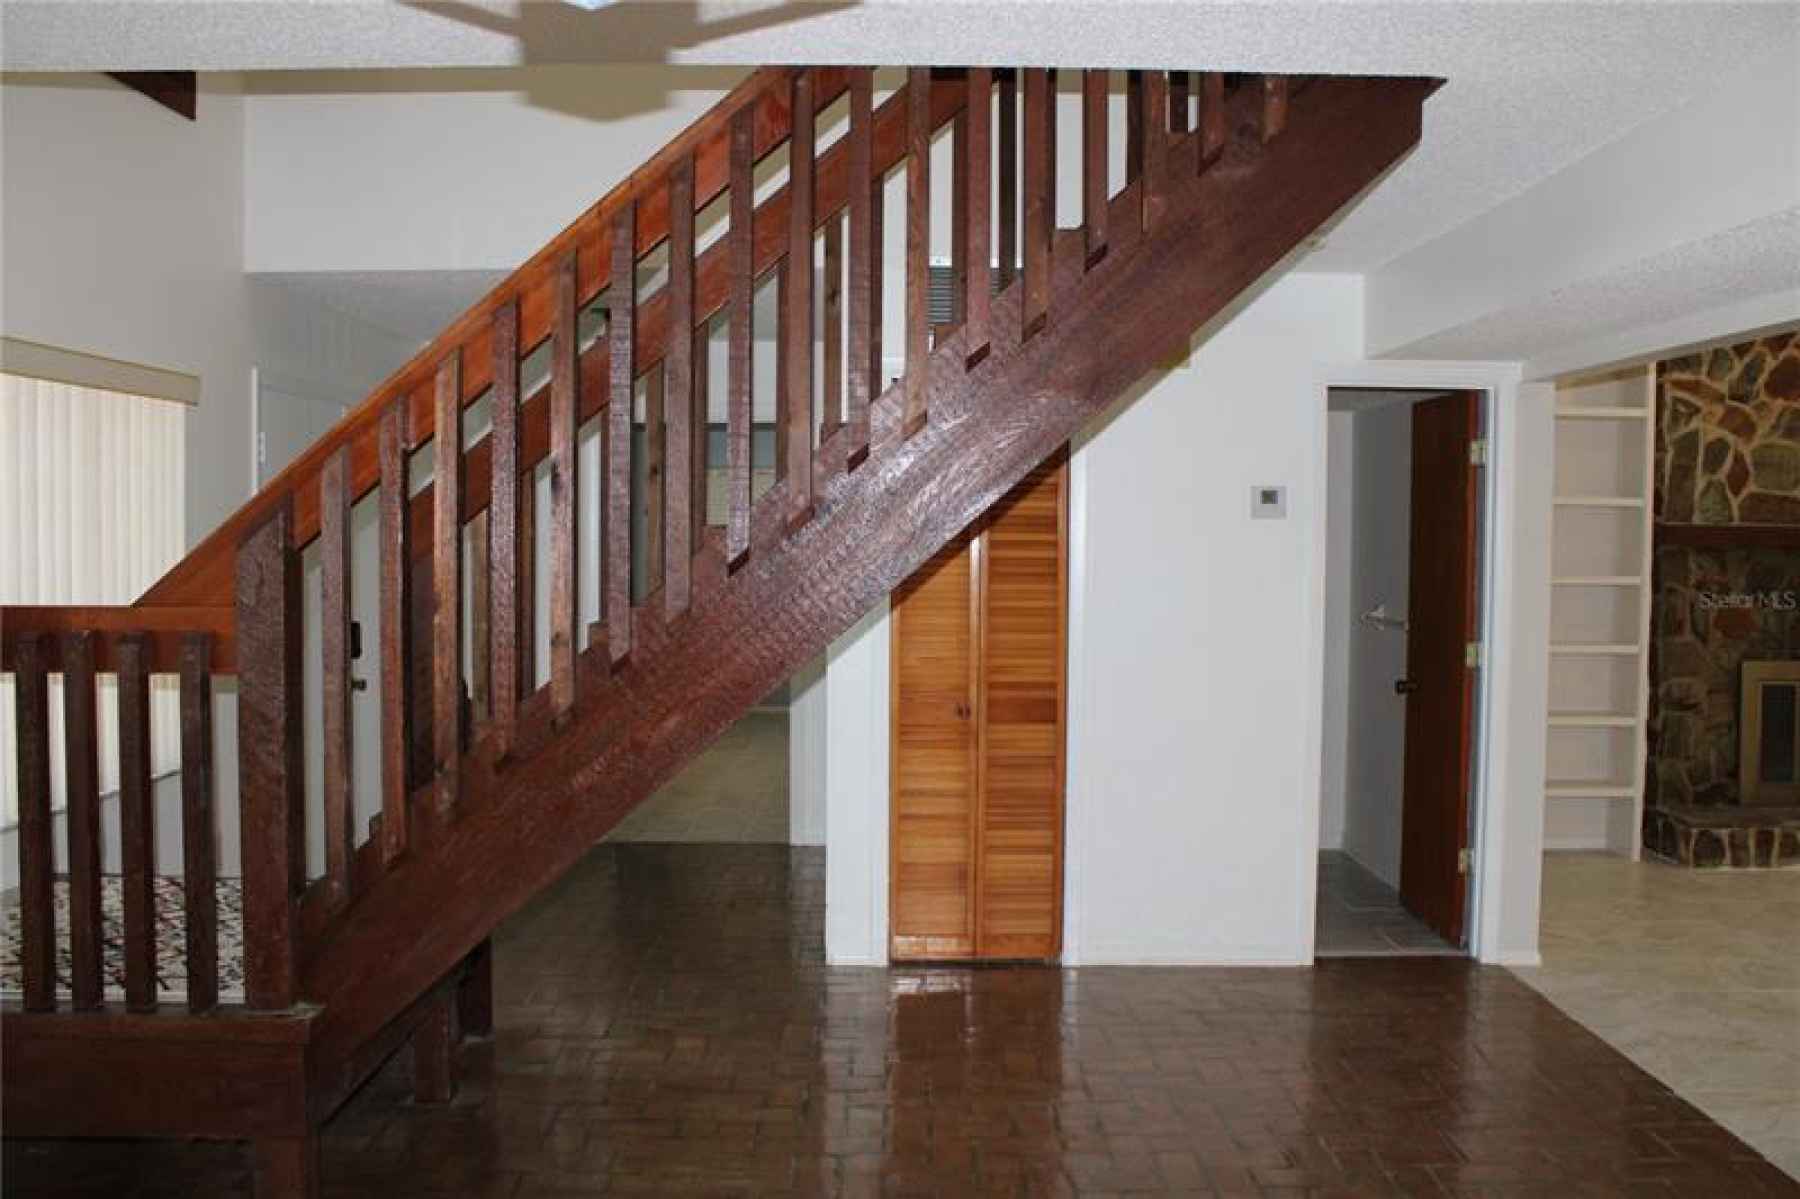 Stair case to second floor